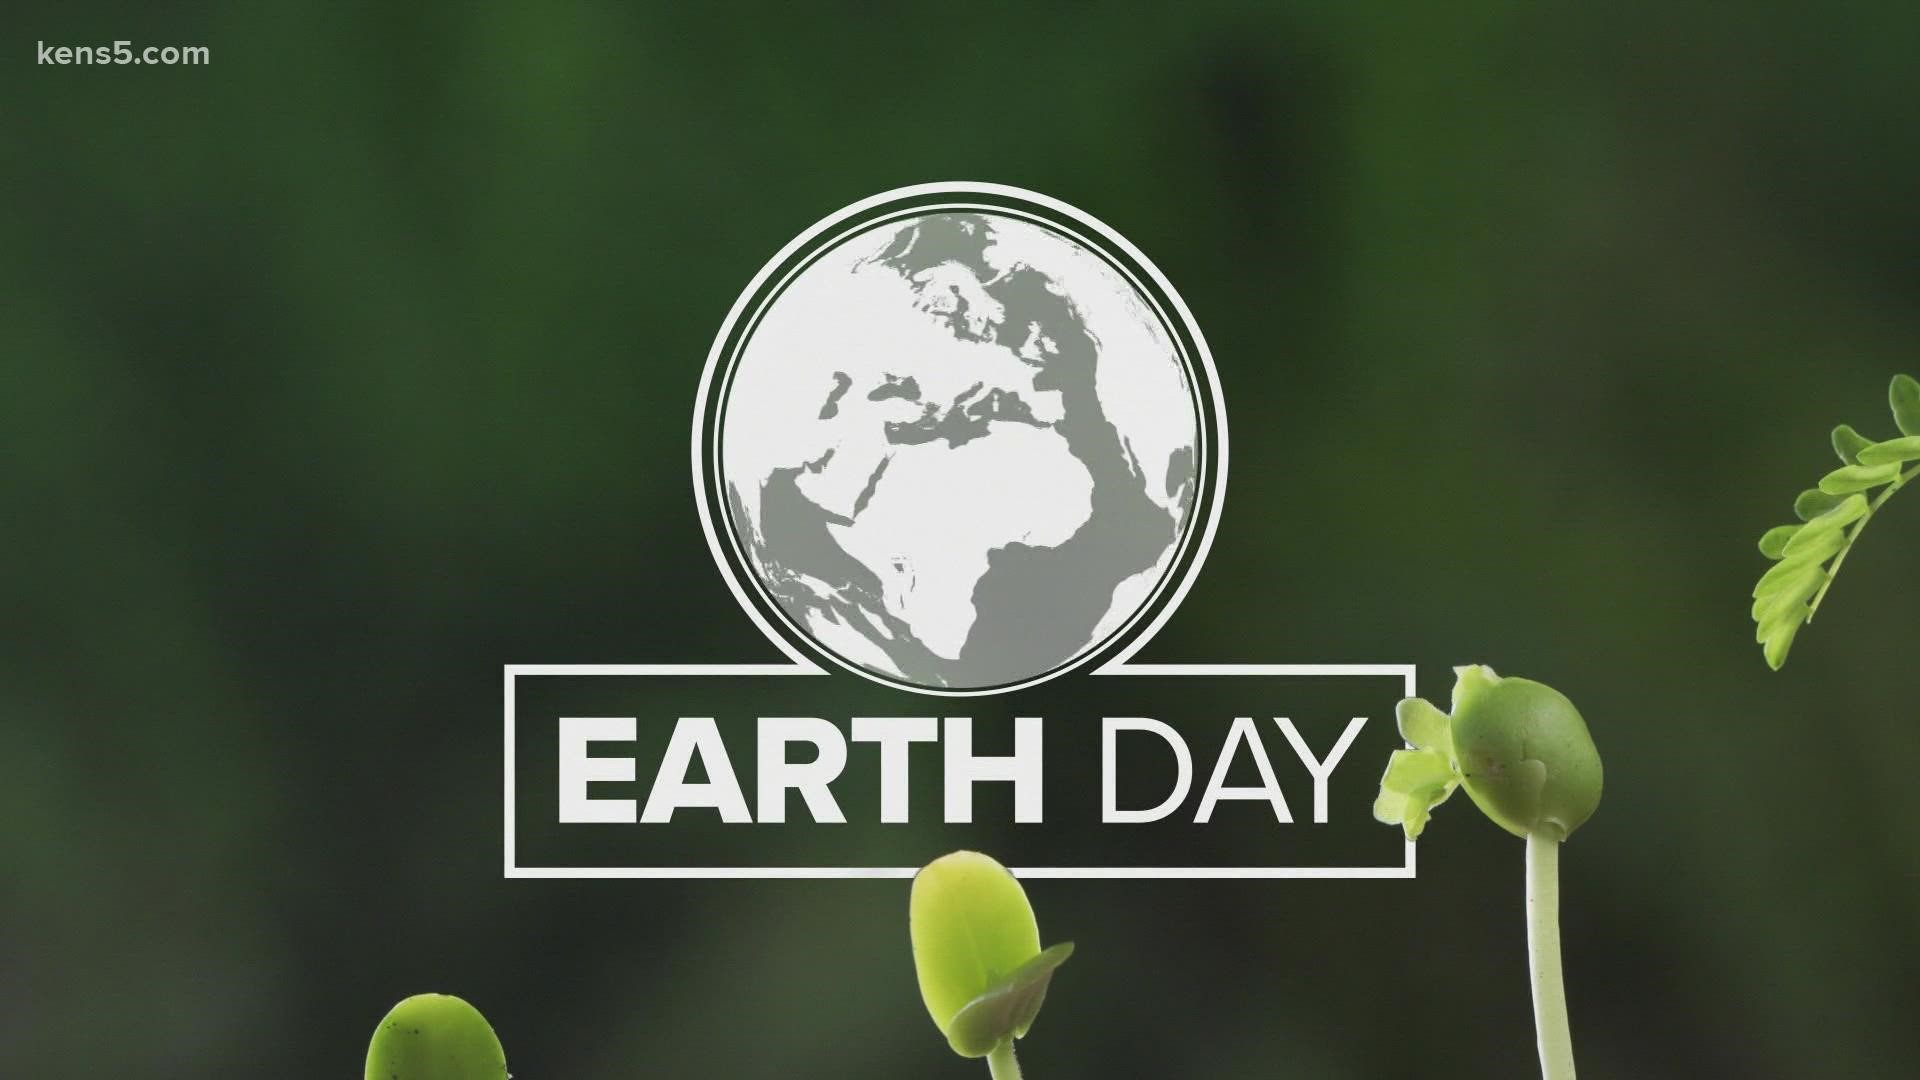 KENS 5 found a line-up of environmentally friendly events to check out.